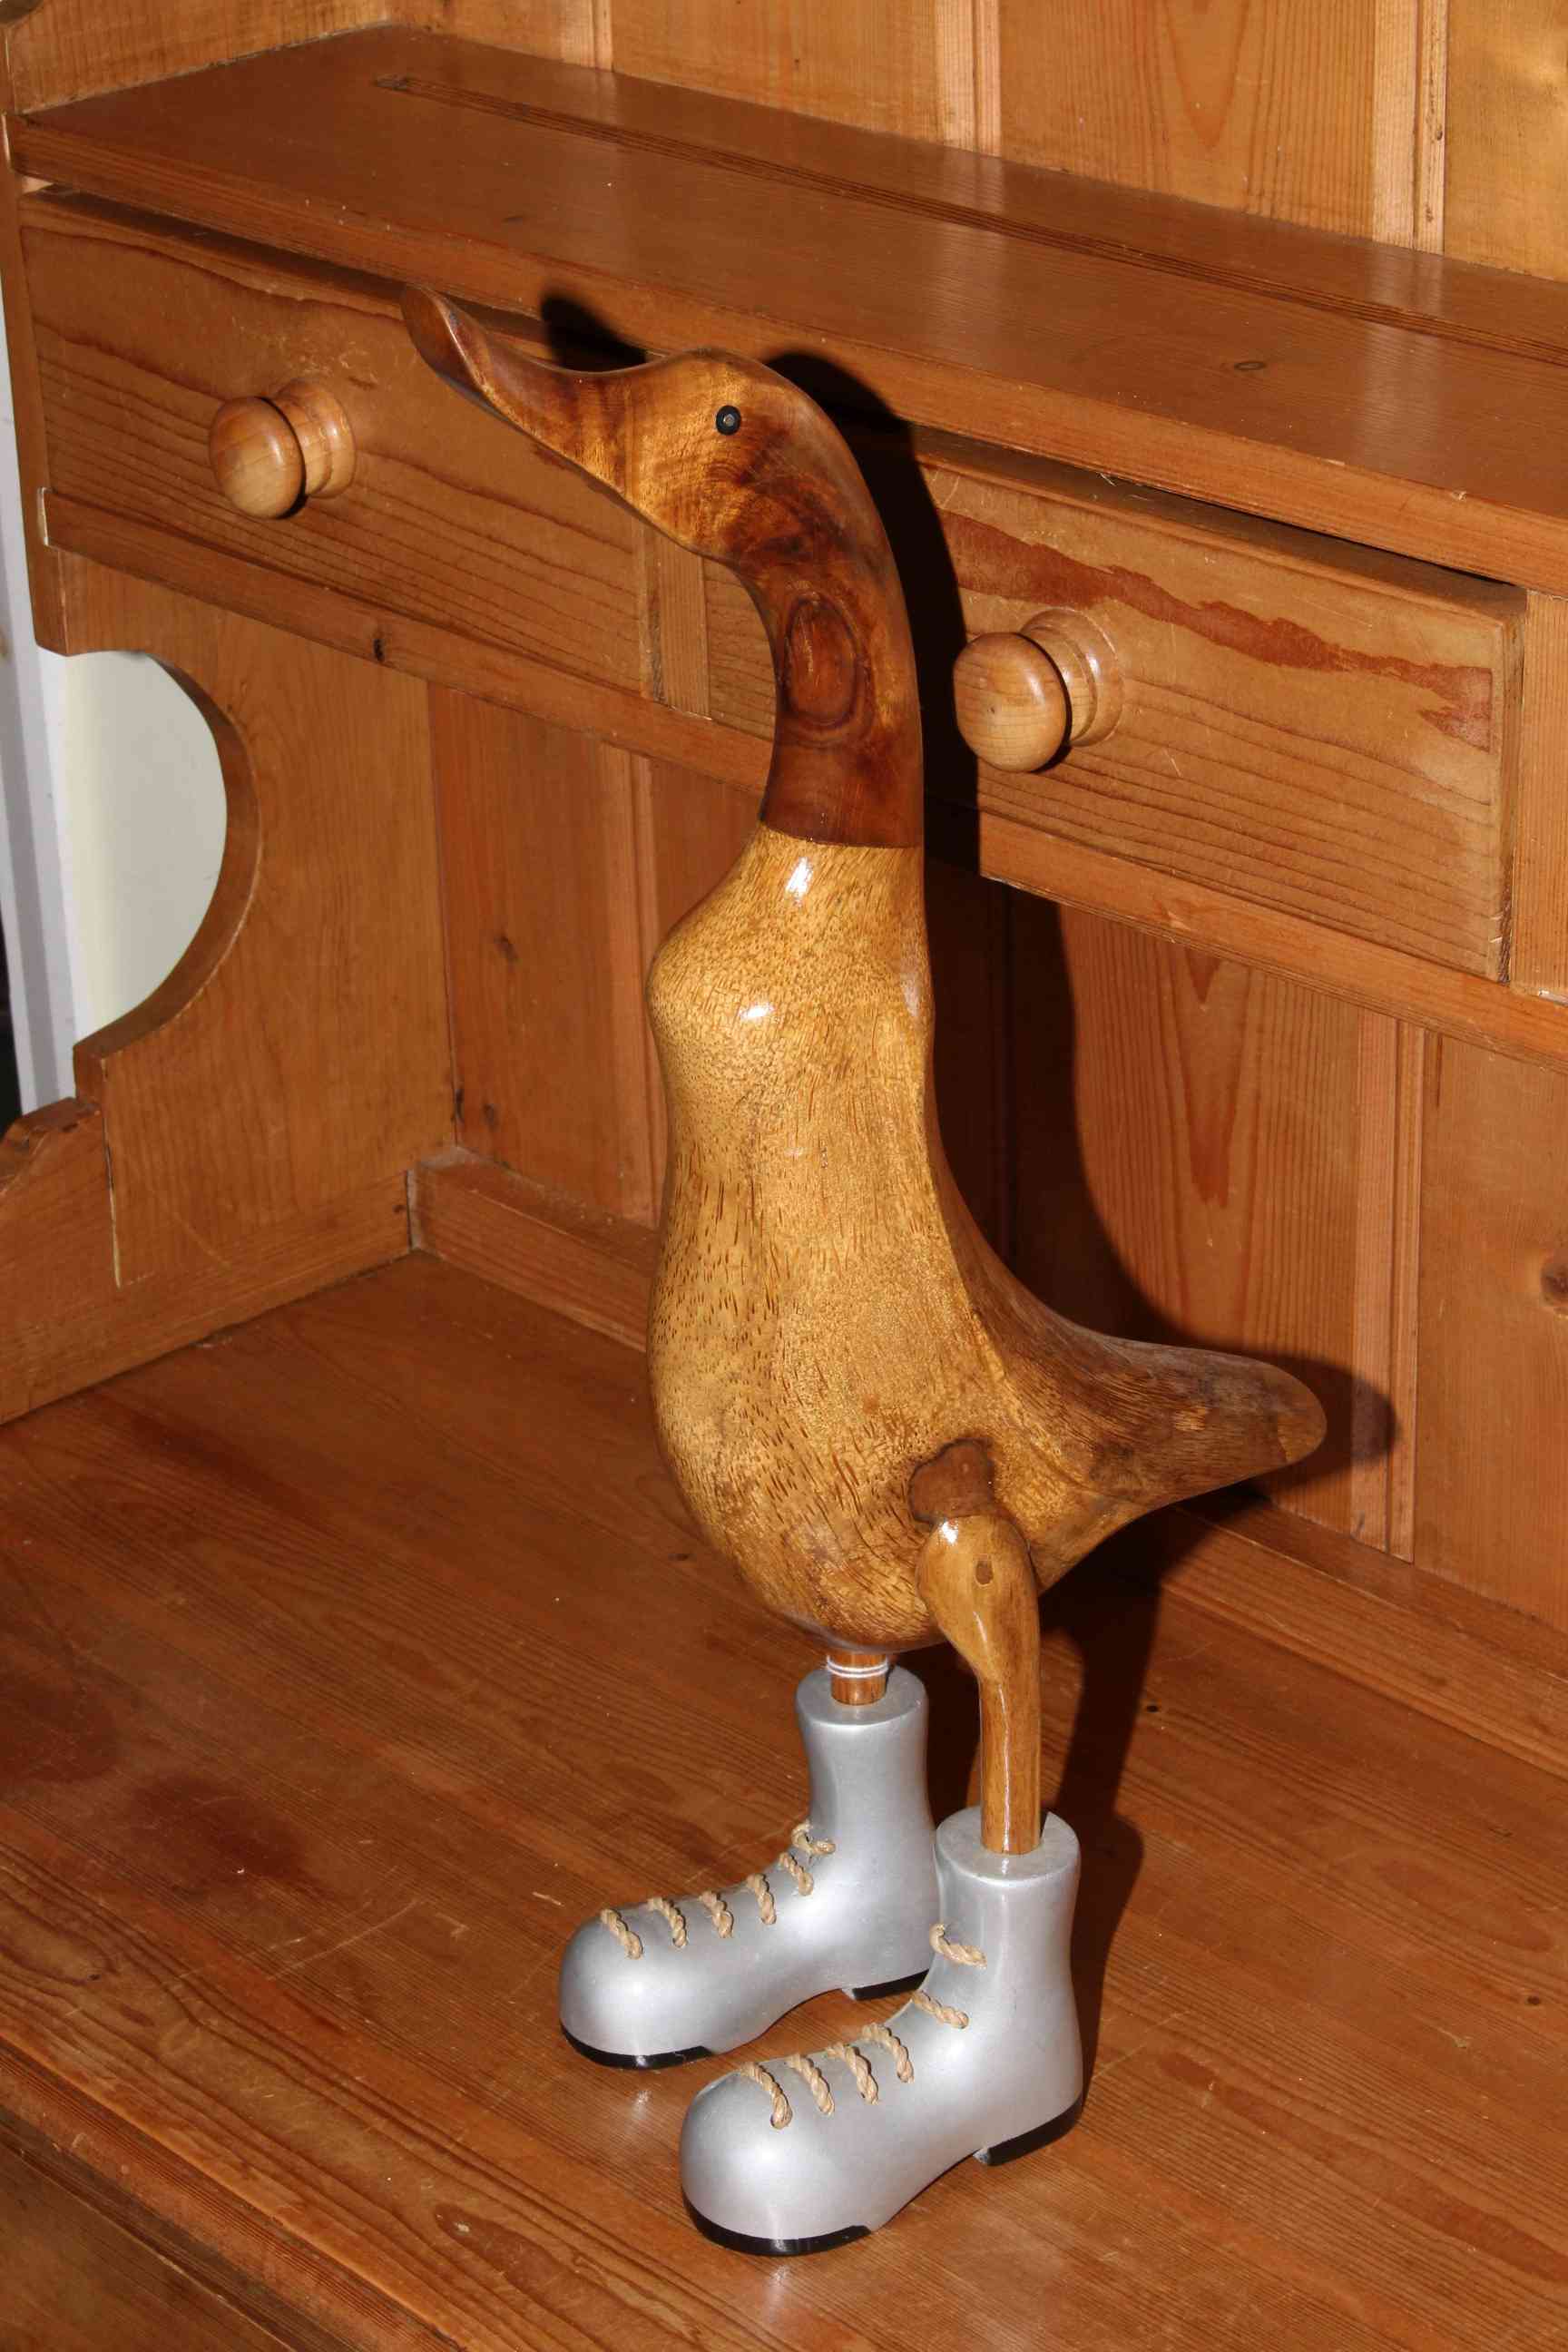 Novelty model of a duck in boots